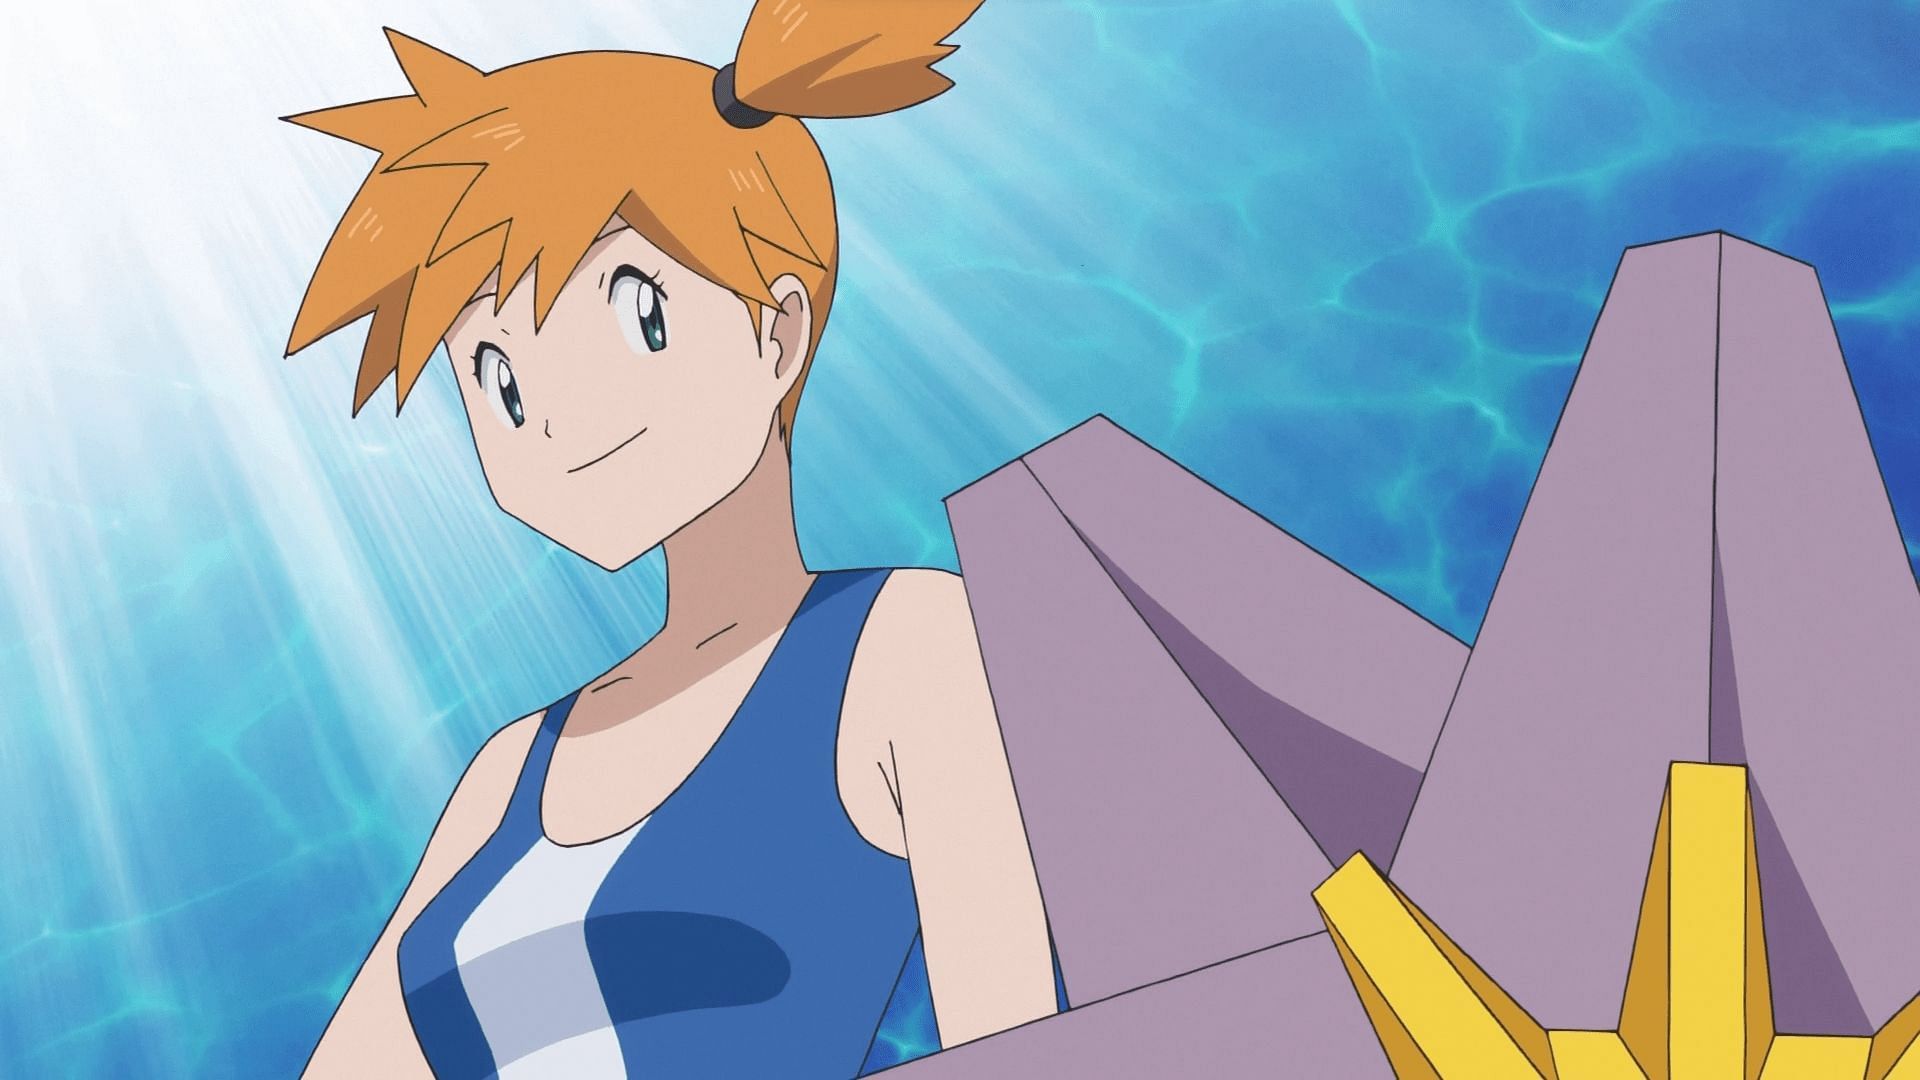 In her original incarnation, Misty was a huge difficulty spike for many trainers (Image via The Pokemon Company)